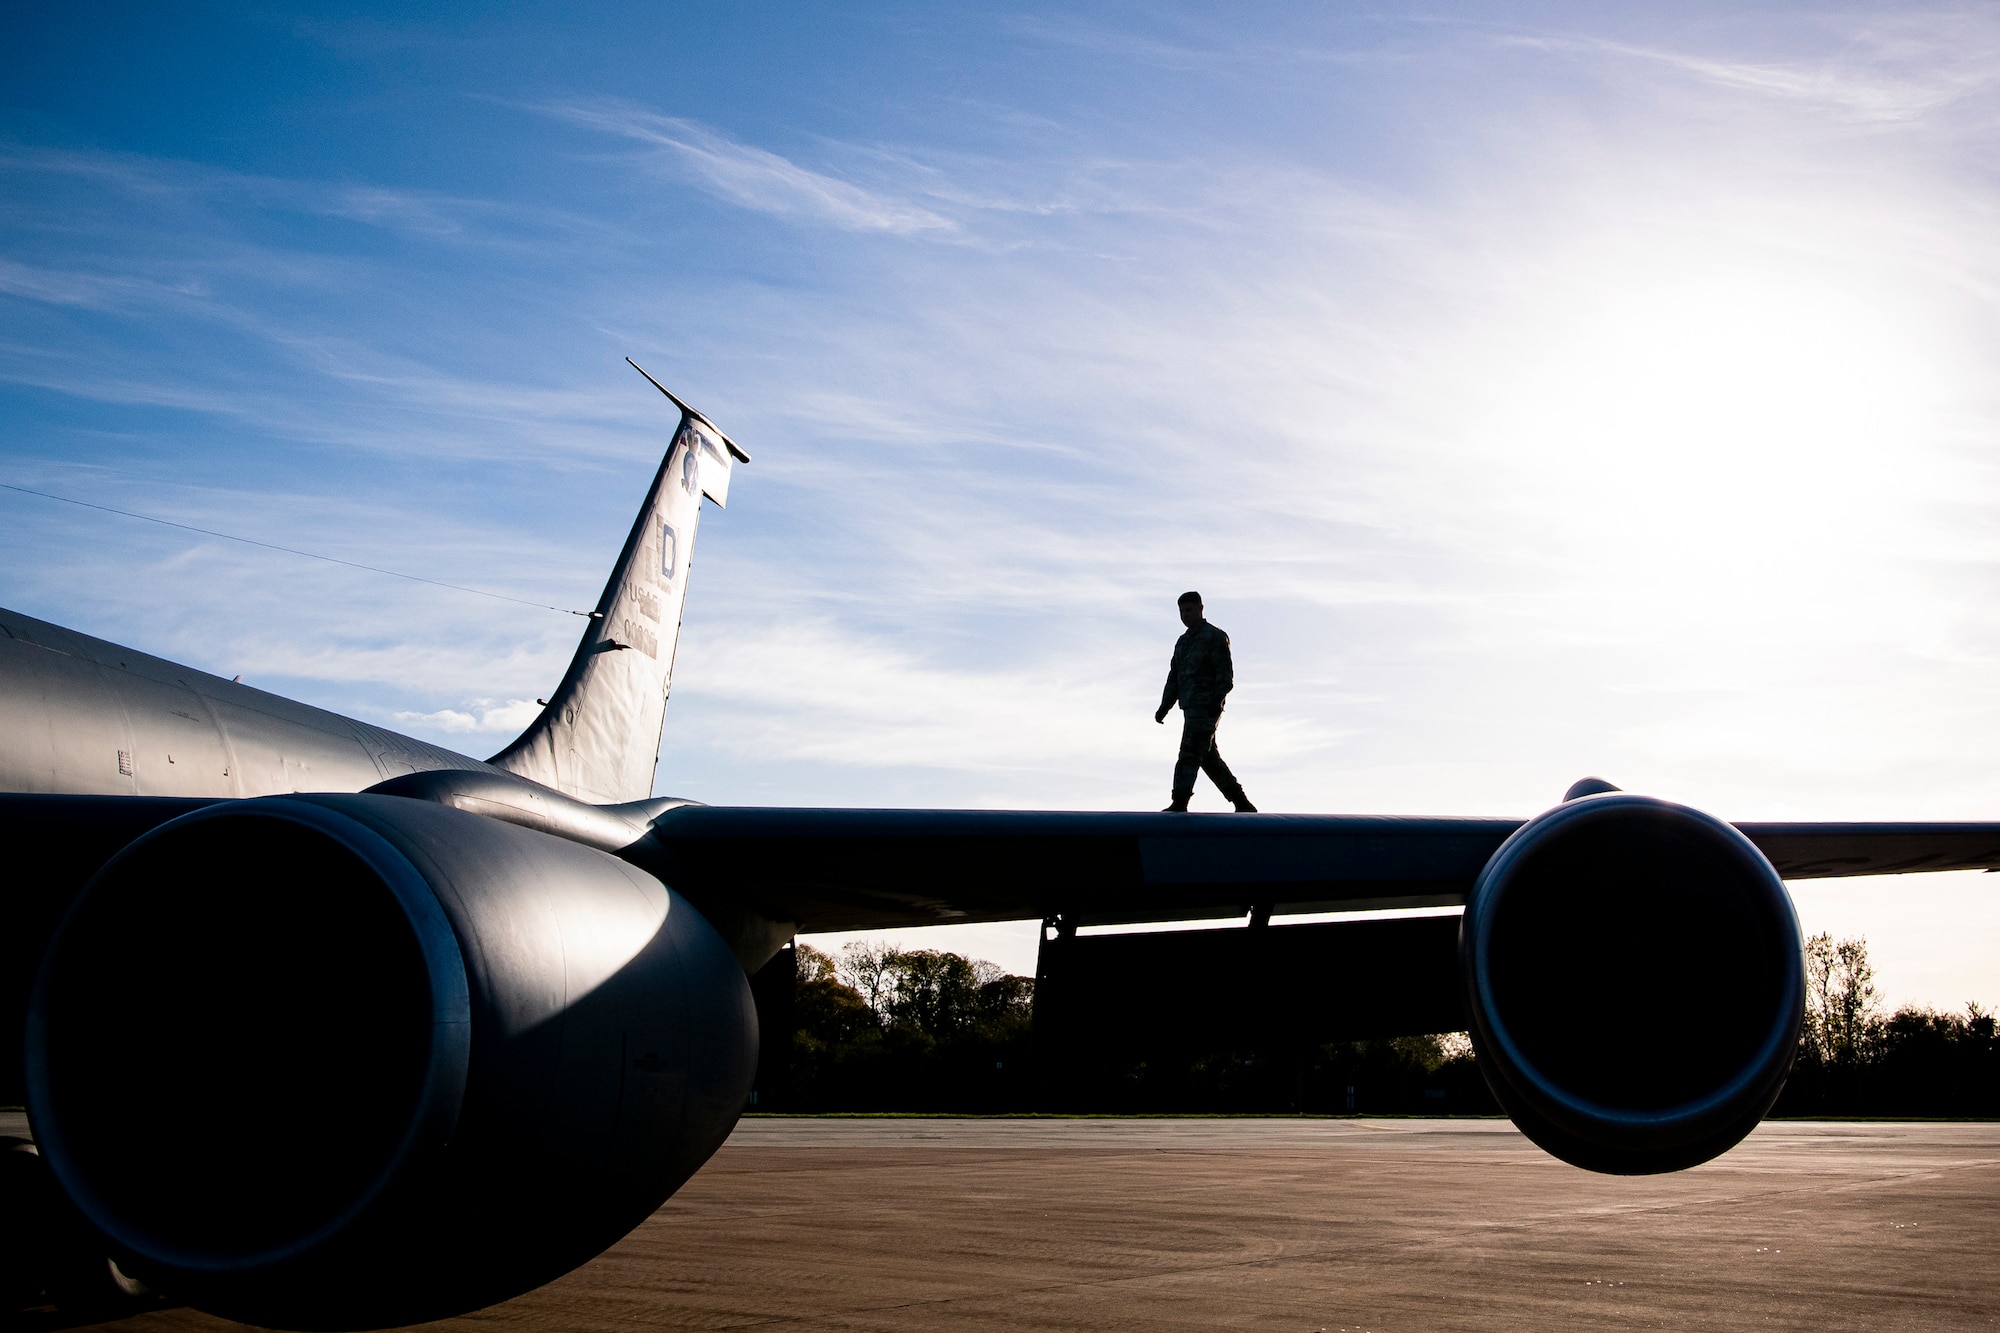 An Airman from the 100th Aircraft Maintenance Squadron walks on the wing of a KC-135 Stratotanker at RAF Fairford, England, Nov. 1, 2021. Airmen from the 100th Air Refueling Wing conducted operations out of RAFF as part of an Agile Combat Employment exercise. The operations taking place at Fairford provide a dynamic and partnership-focused training environment which ensures U.S. forces remain postured to deliver airpower across the European theater while strengthening interoperability with our NATO allies. (U.S. Air Force photo by Senior Airman Eugene Oliver)